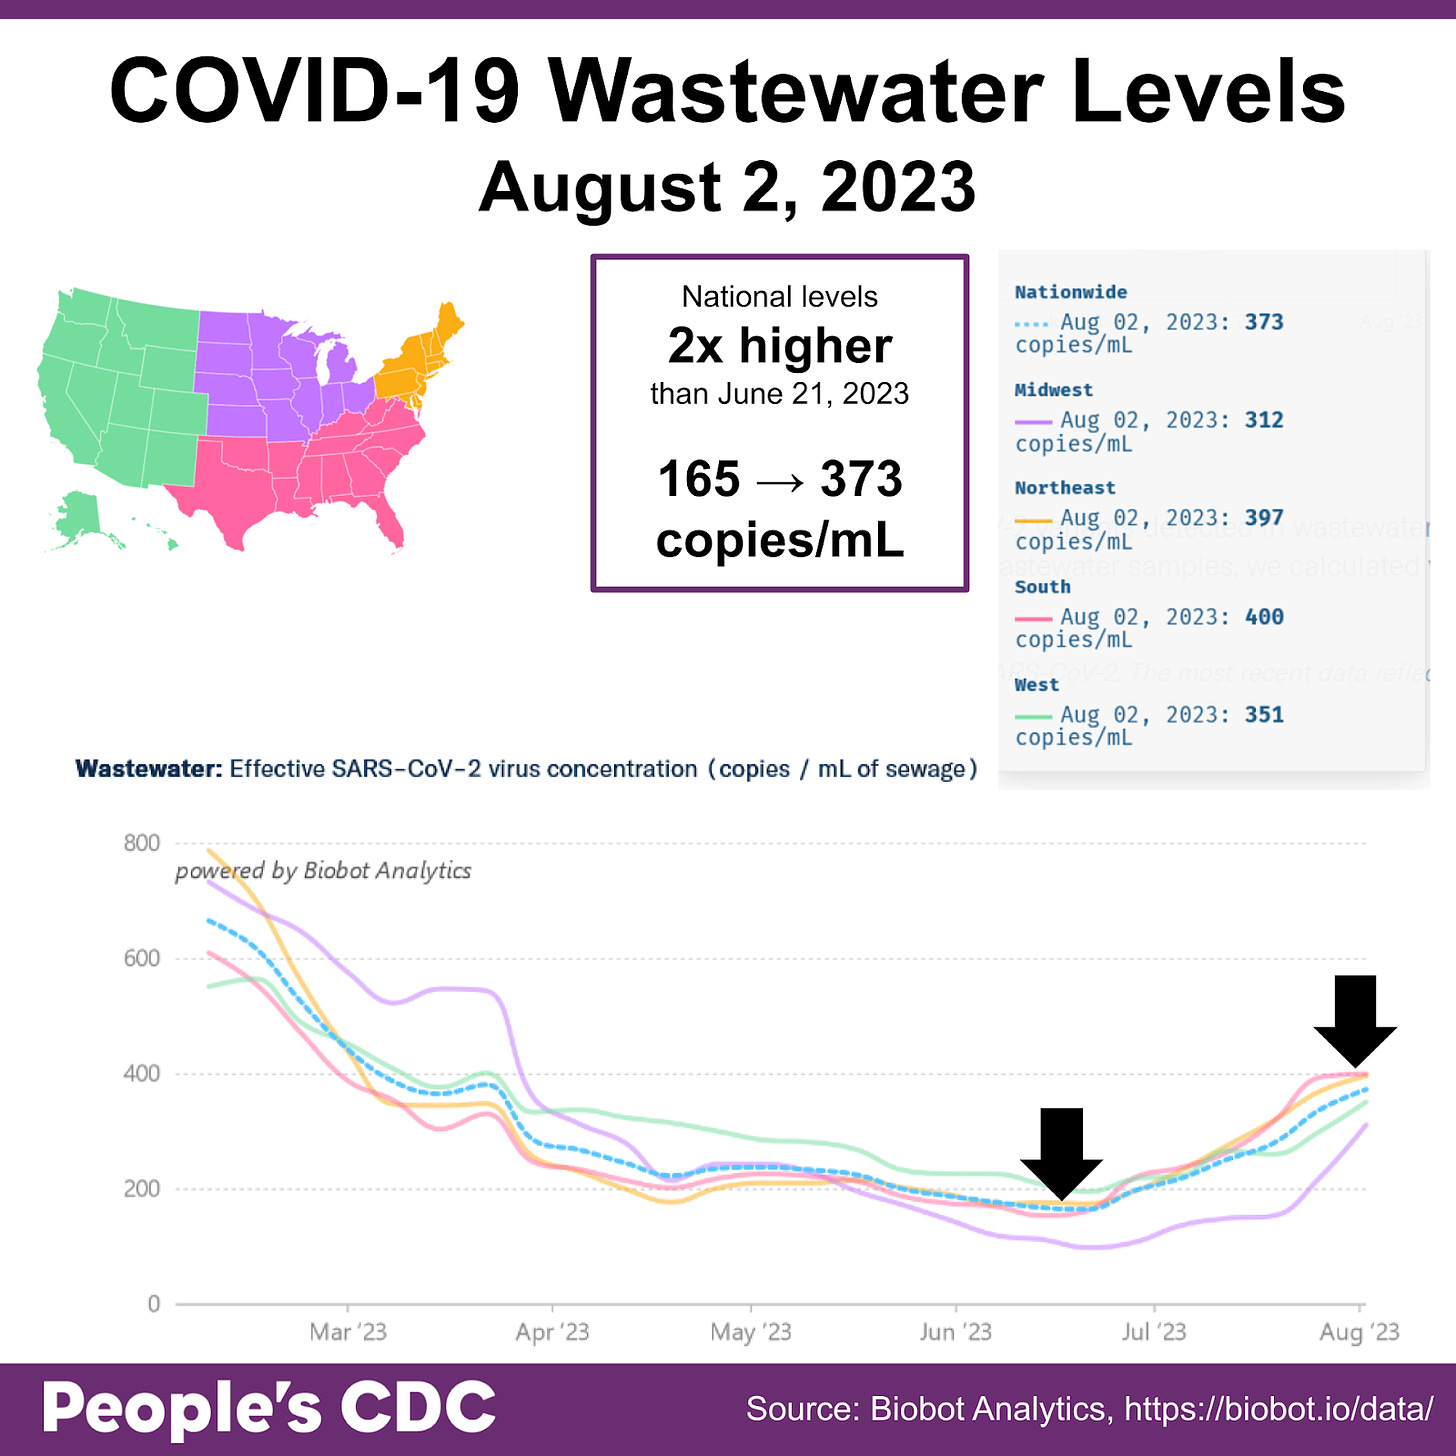 Title reads “COVID-19 Wastewater Levels August 2, 2023.” A map of the United States in the upper left corner serves as a key. The West is green, Midwest is purple, South is pink, and Northeast is orange. Text in the middle surrounded by a purple square reads “National Levels 2x higher than June 21, 2023. 165 → 373 copies/mL.” A graph on the bottom is titled “Wastewater: Effective SARS-CoV-2 virus concentration (copies / mL of sewage).” On the bottom, a line graph shows Mar 2023 through Aug 2023. The line graph shows X-axis labels March ‘23 and Aug ‘23 with regional virus concentrations showing a decrease in all regions from March to mid-June, but rising from mid June to August nationwide. One black arrow points to the graph in mid June where nationwide virus concentration is 165 copies/mL. Another black arrow points to the graph in August where nationwide virus concentration has increased to 373 copies/mL. A key on the upper right states concentration as of August 2, 2023: 373 copies / mL (Nationwide), 312 copies / mL (Midwest), 397 copies / mL (Northeast), 400 copies / mL (Southeast), and 351 copies / mL (West).